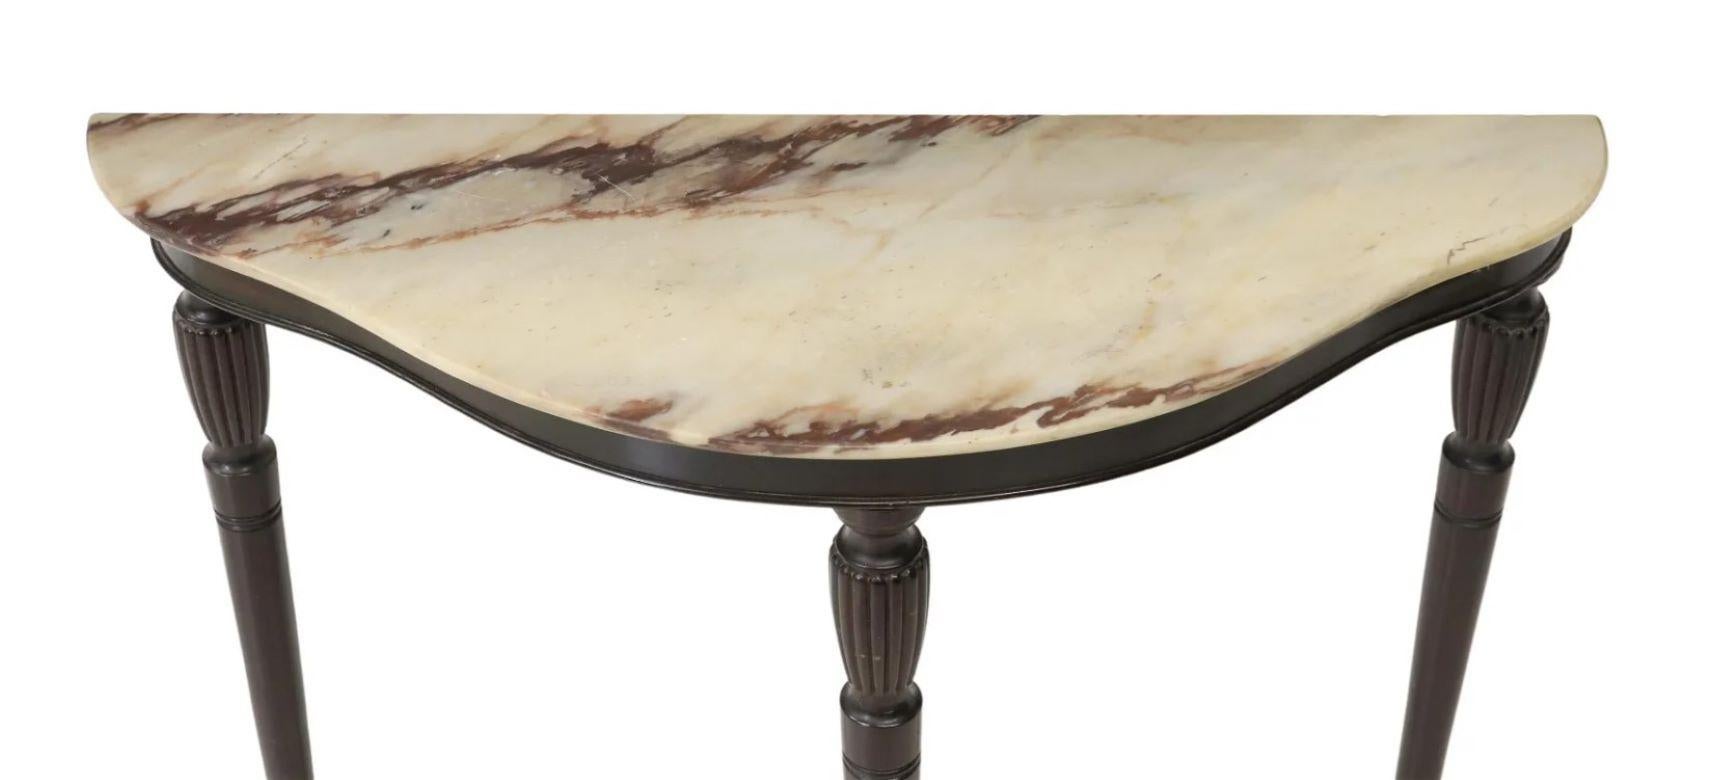 20th Century Mid-Century Modern Italian Marble Console Table  For Sale